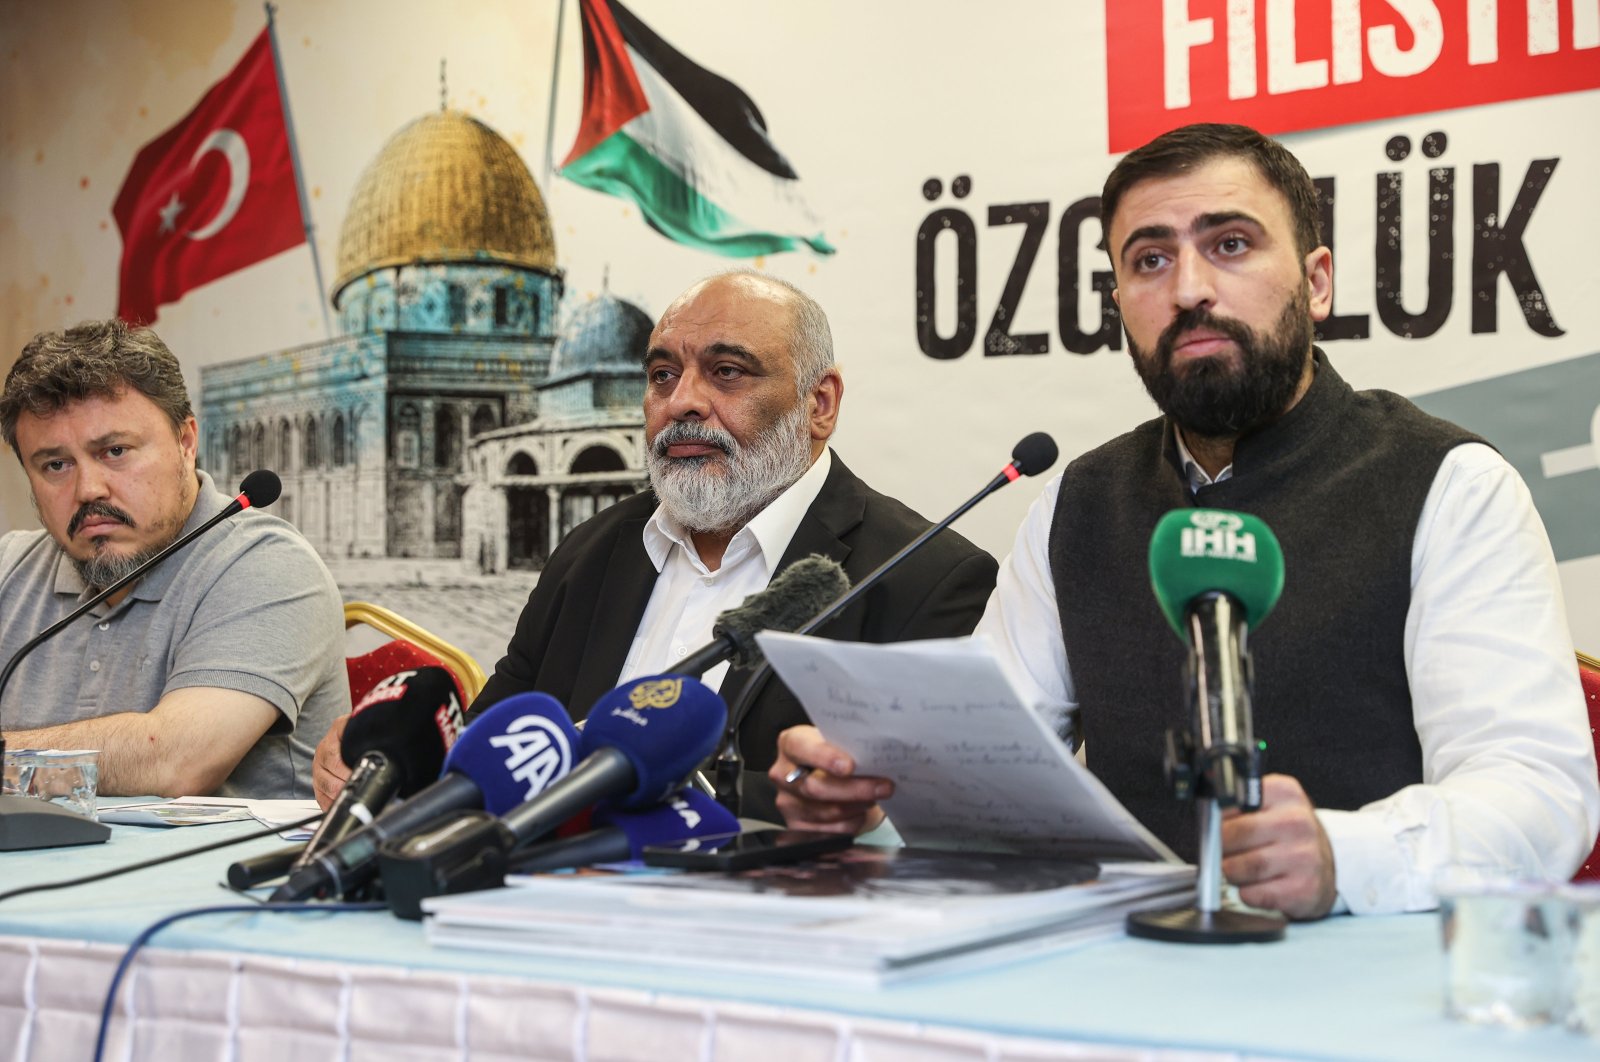 Beheşti İsmail Songür, head of the Mavi Marmara Freedom and Solidarity Association, is seen speaking at a panel in Fatih district, Istanbul, Oct.31, 2023. (AA Photo)